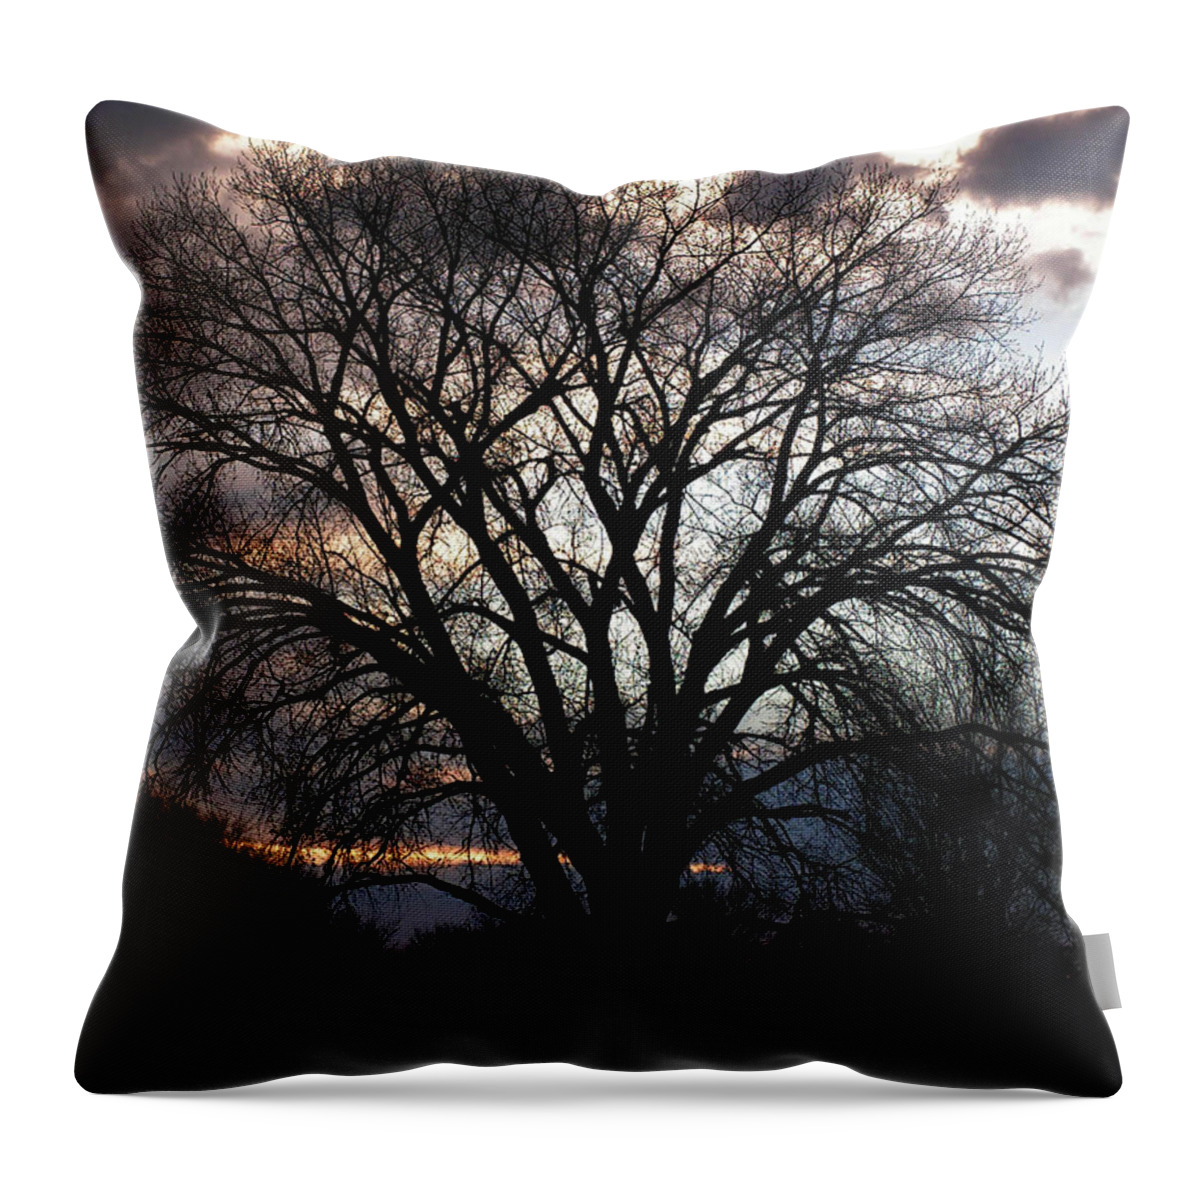 Landscape Throw Pillow featuring the photograph Tree by Pamela Romjue